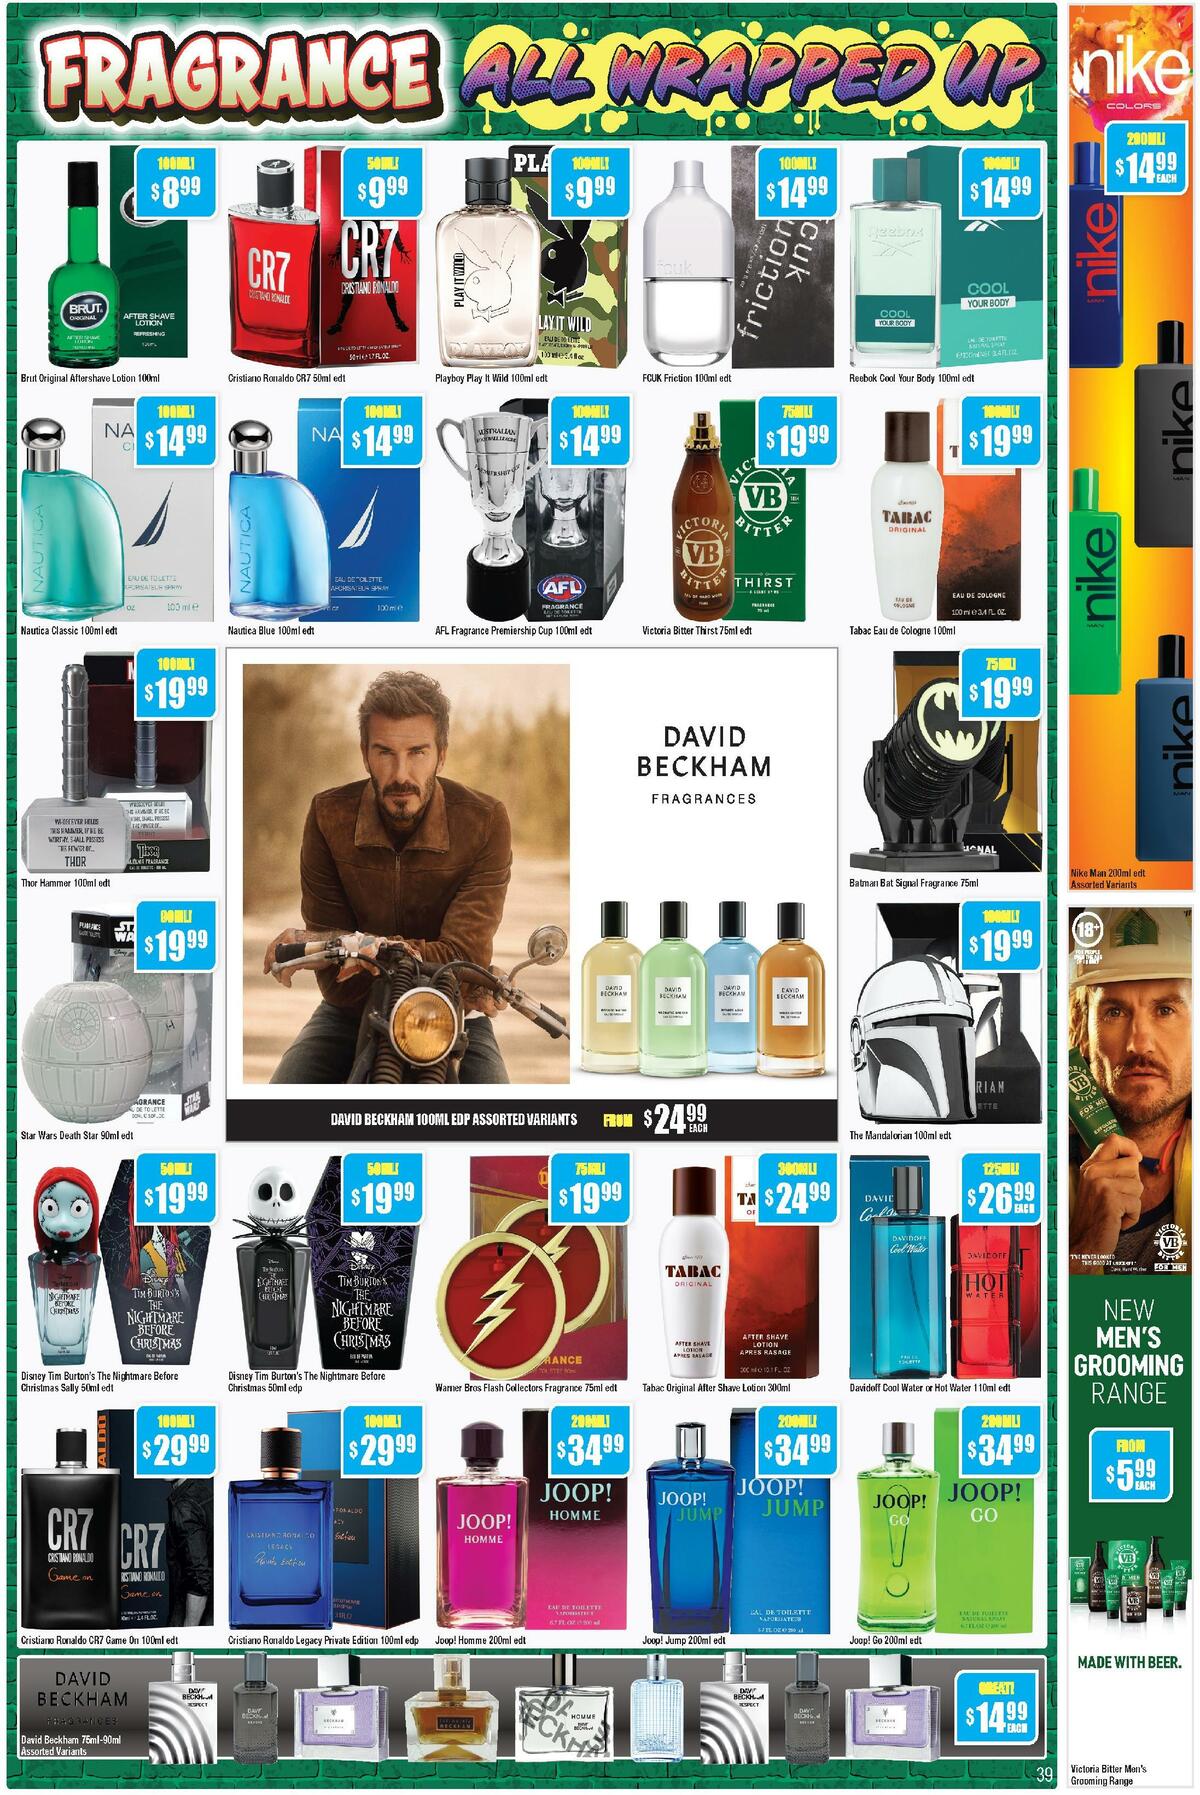 Chemist Warehouse Catalogues from 28 November